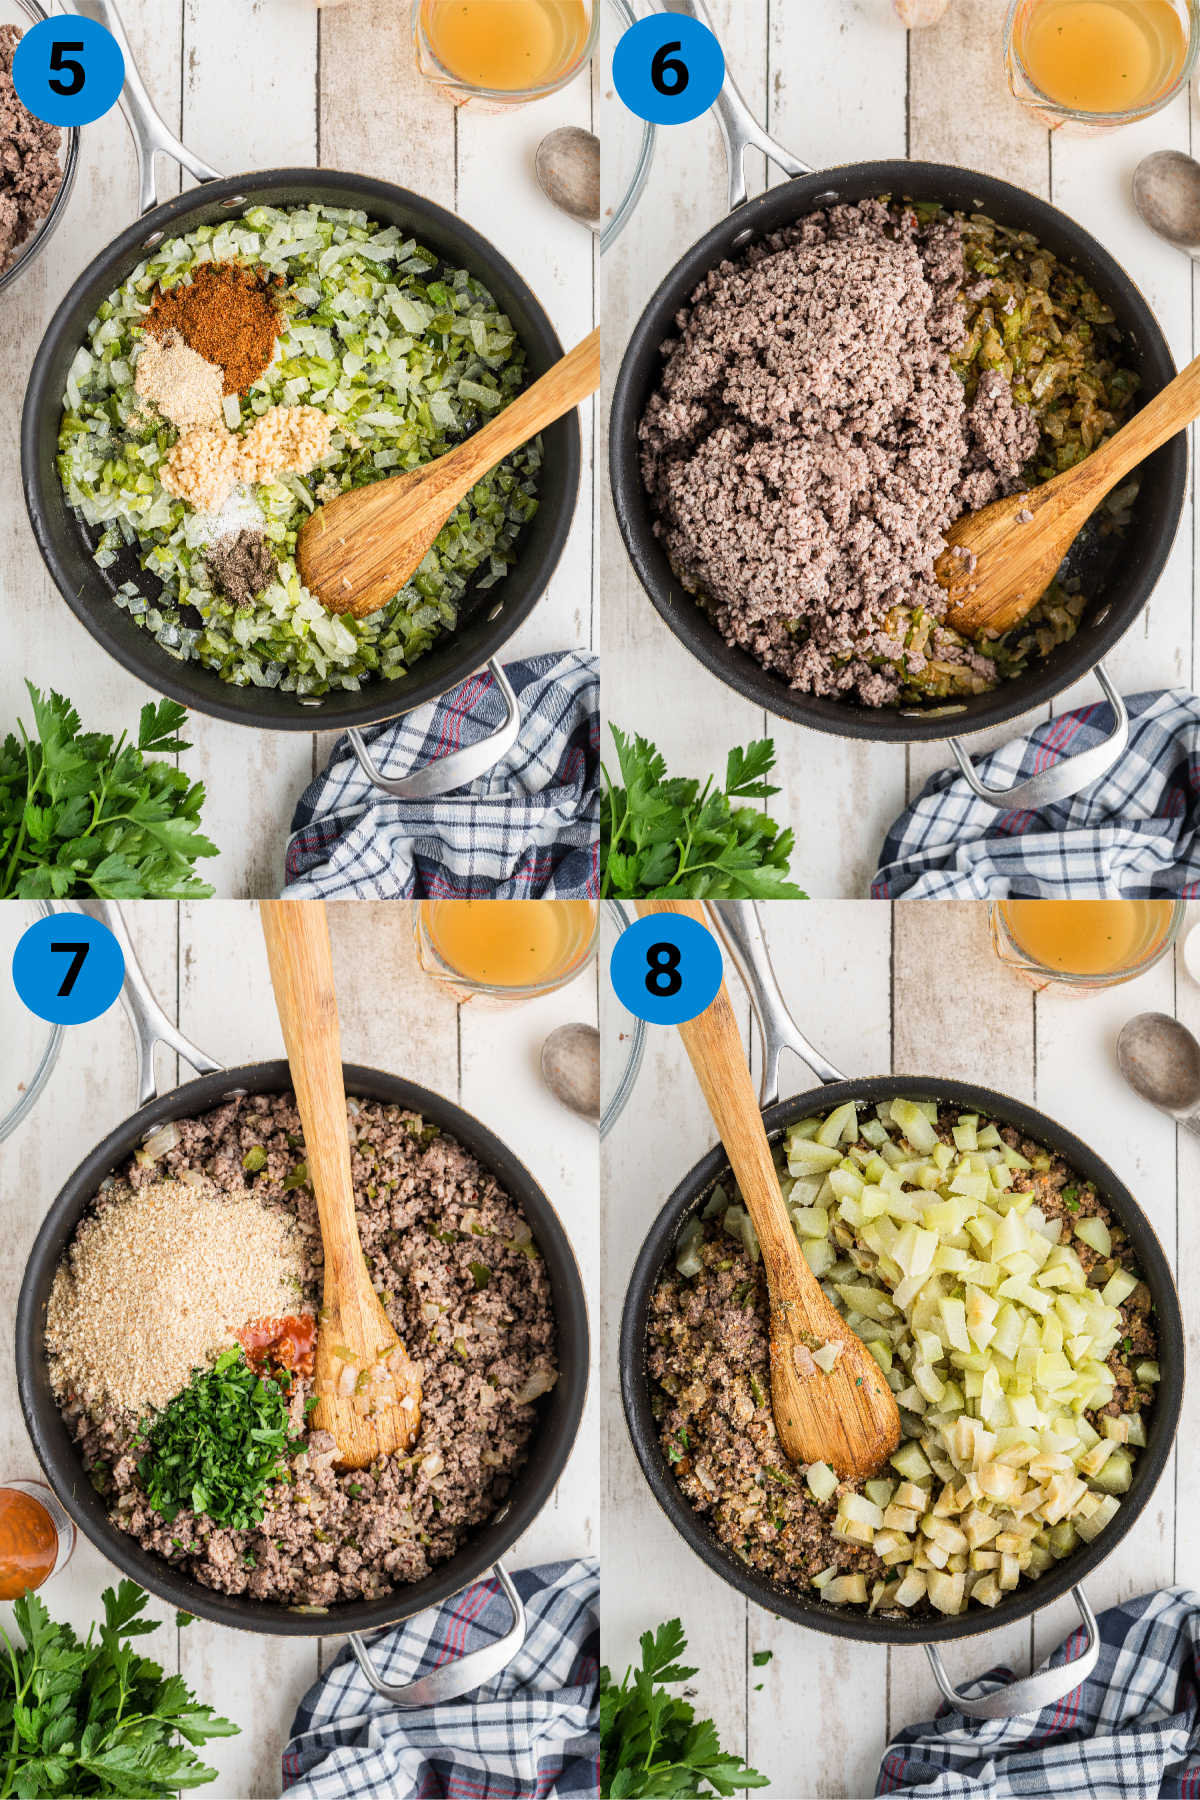 A collage of four images showing how to make mirliton dressing, recipe steps 5-8.